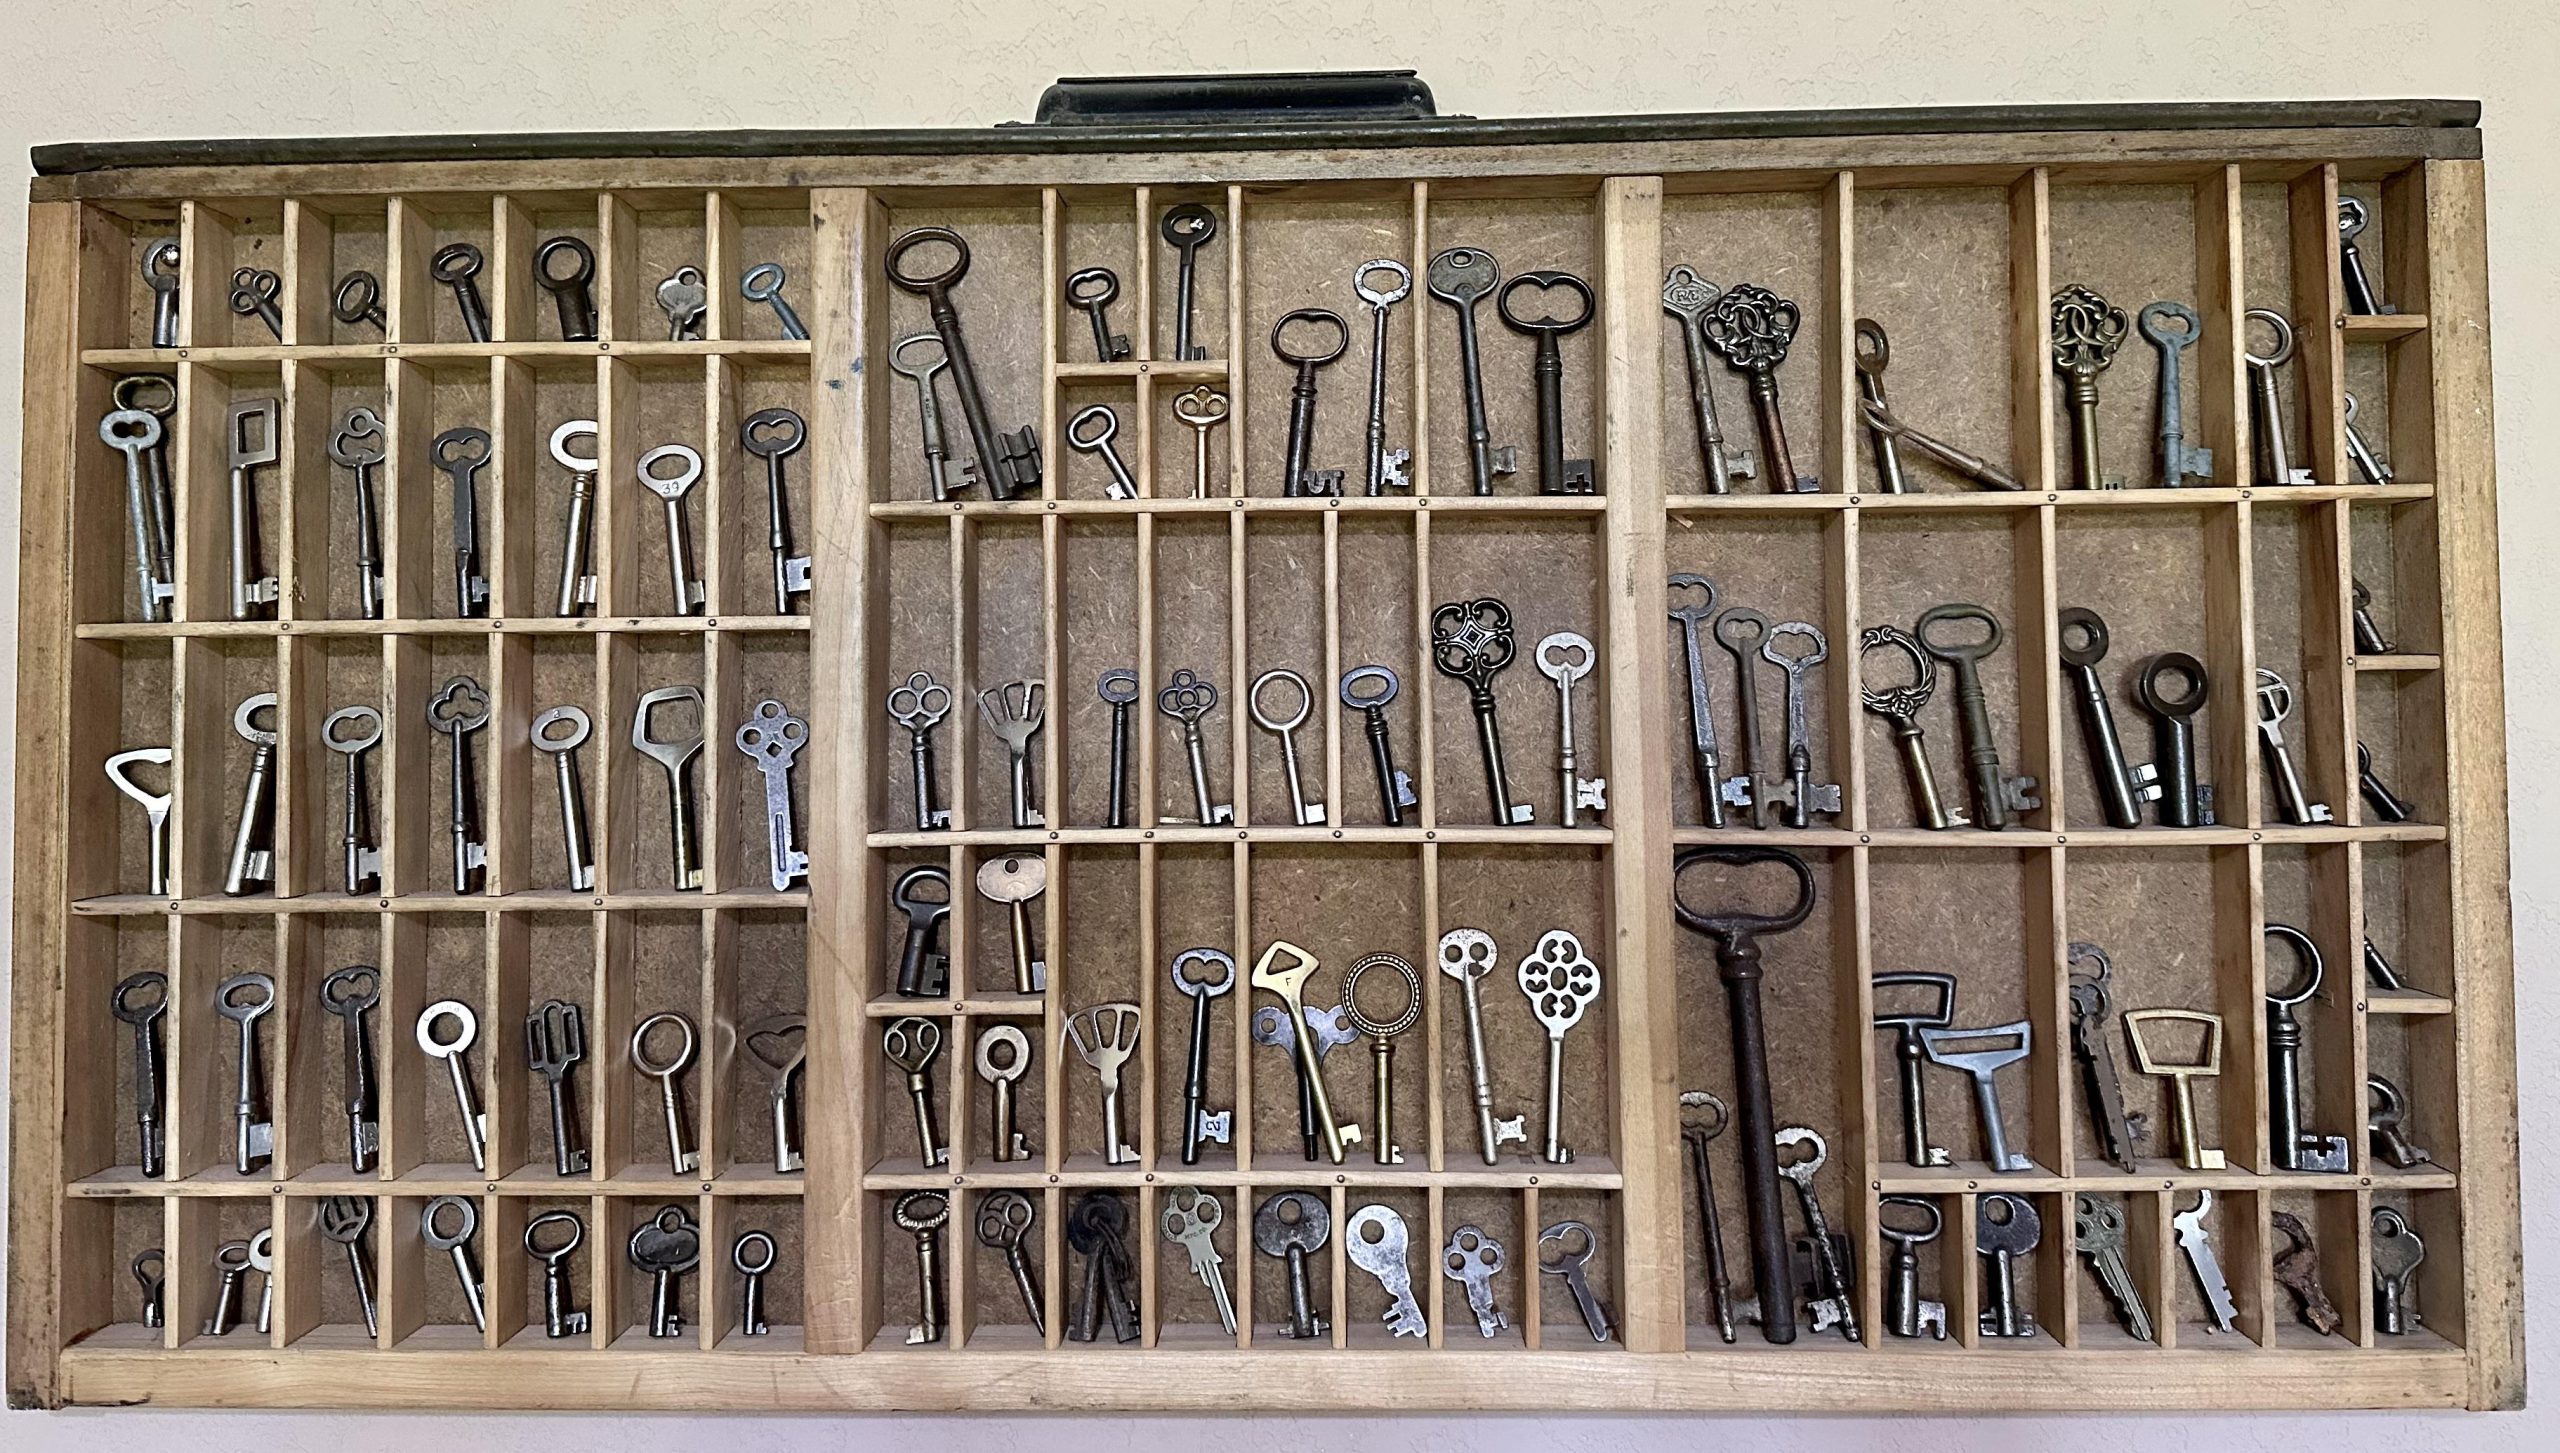 How Should I Store And Display My Antique Tool Collection?